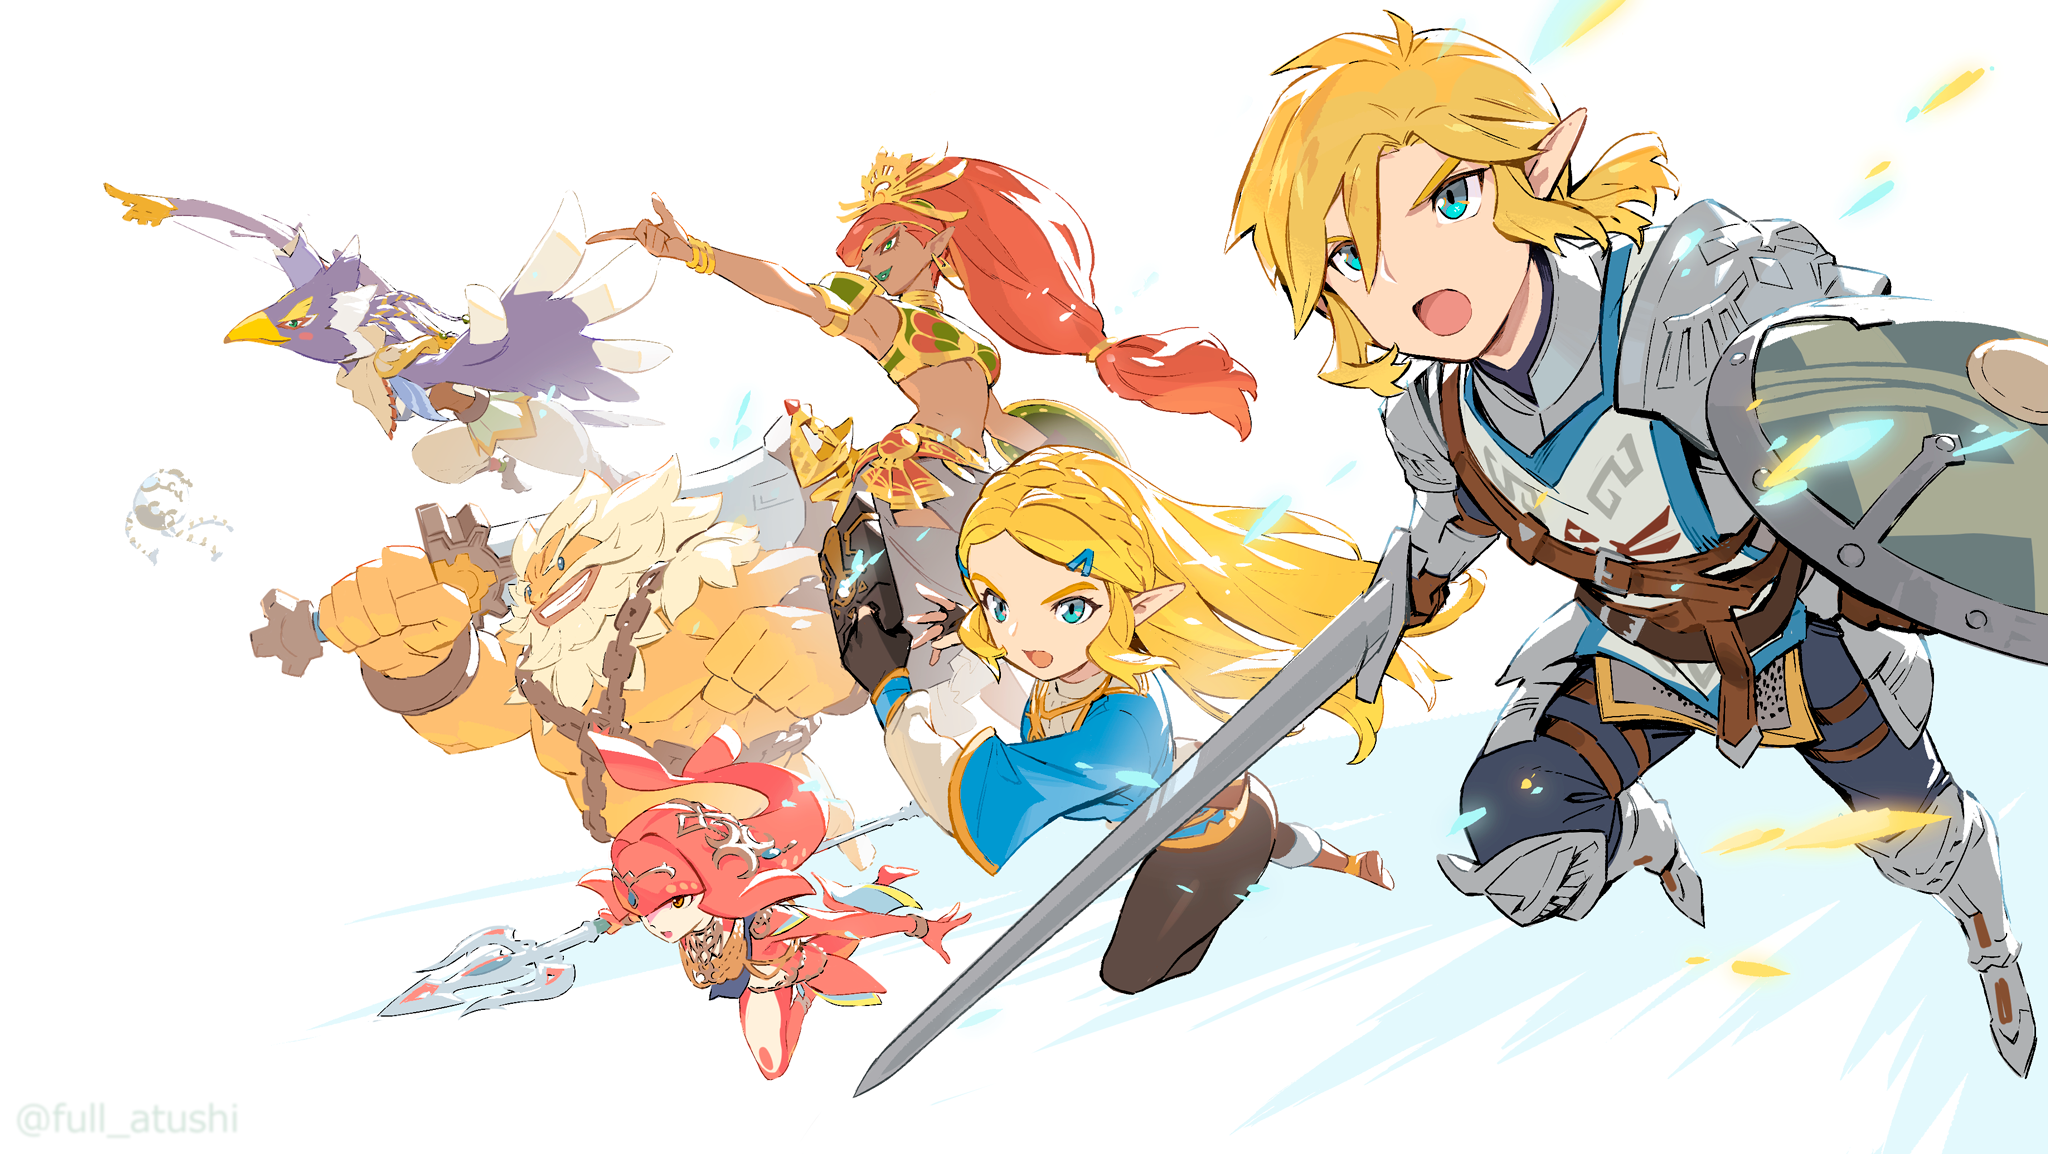 Video Game The Legend of Zelda: Breath of the Wild HD Wallpaper by 古澤あつし